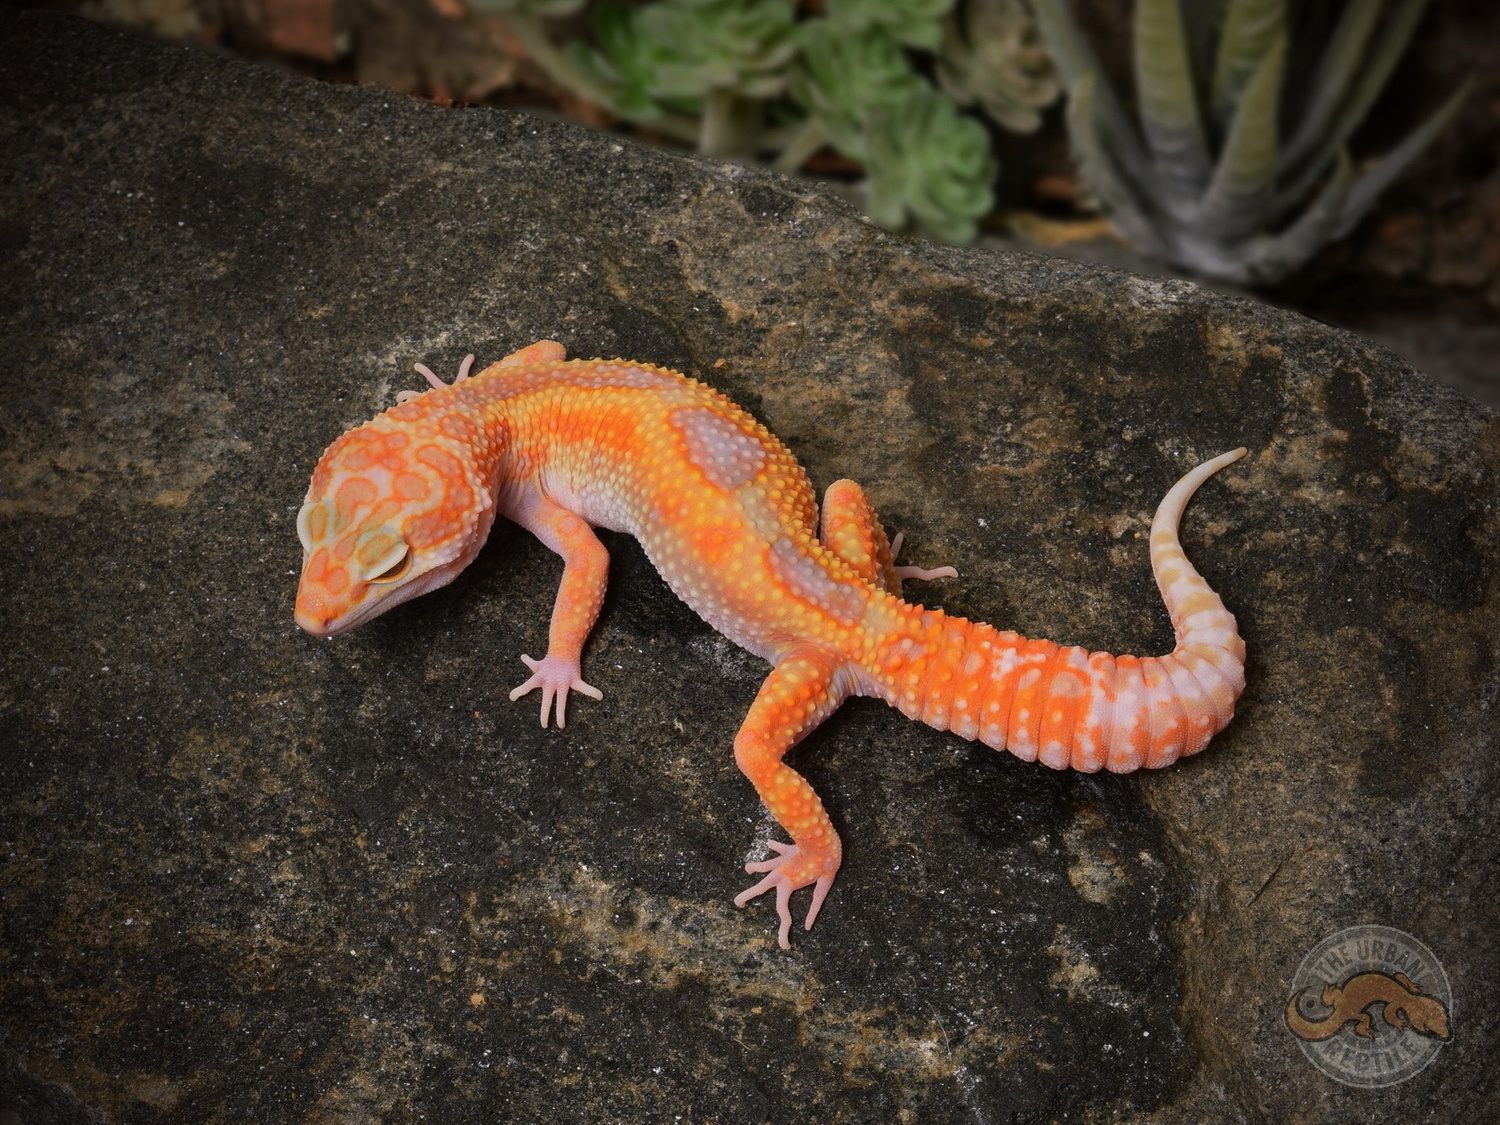 White & Yellow Tremper GIANT Jungle Leopard Gecko by The Urban Reptile